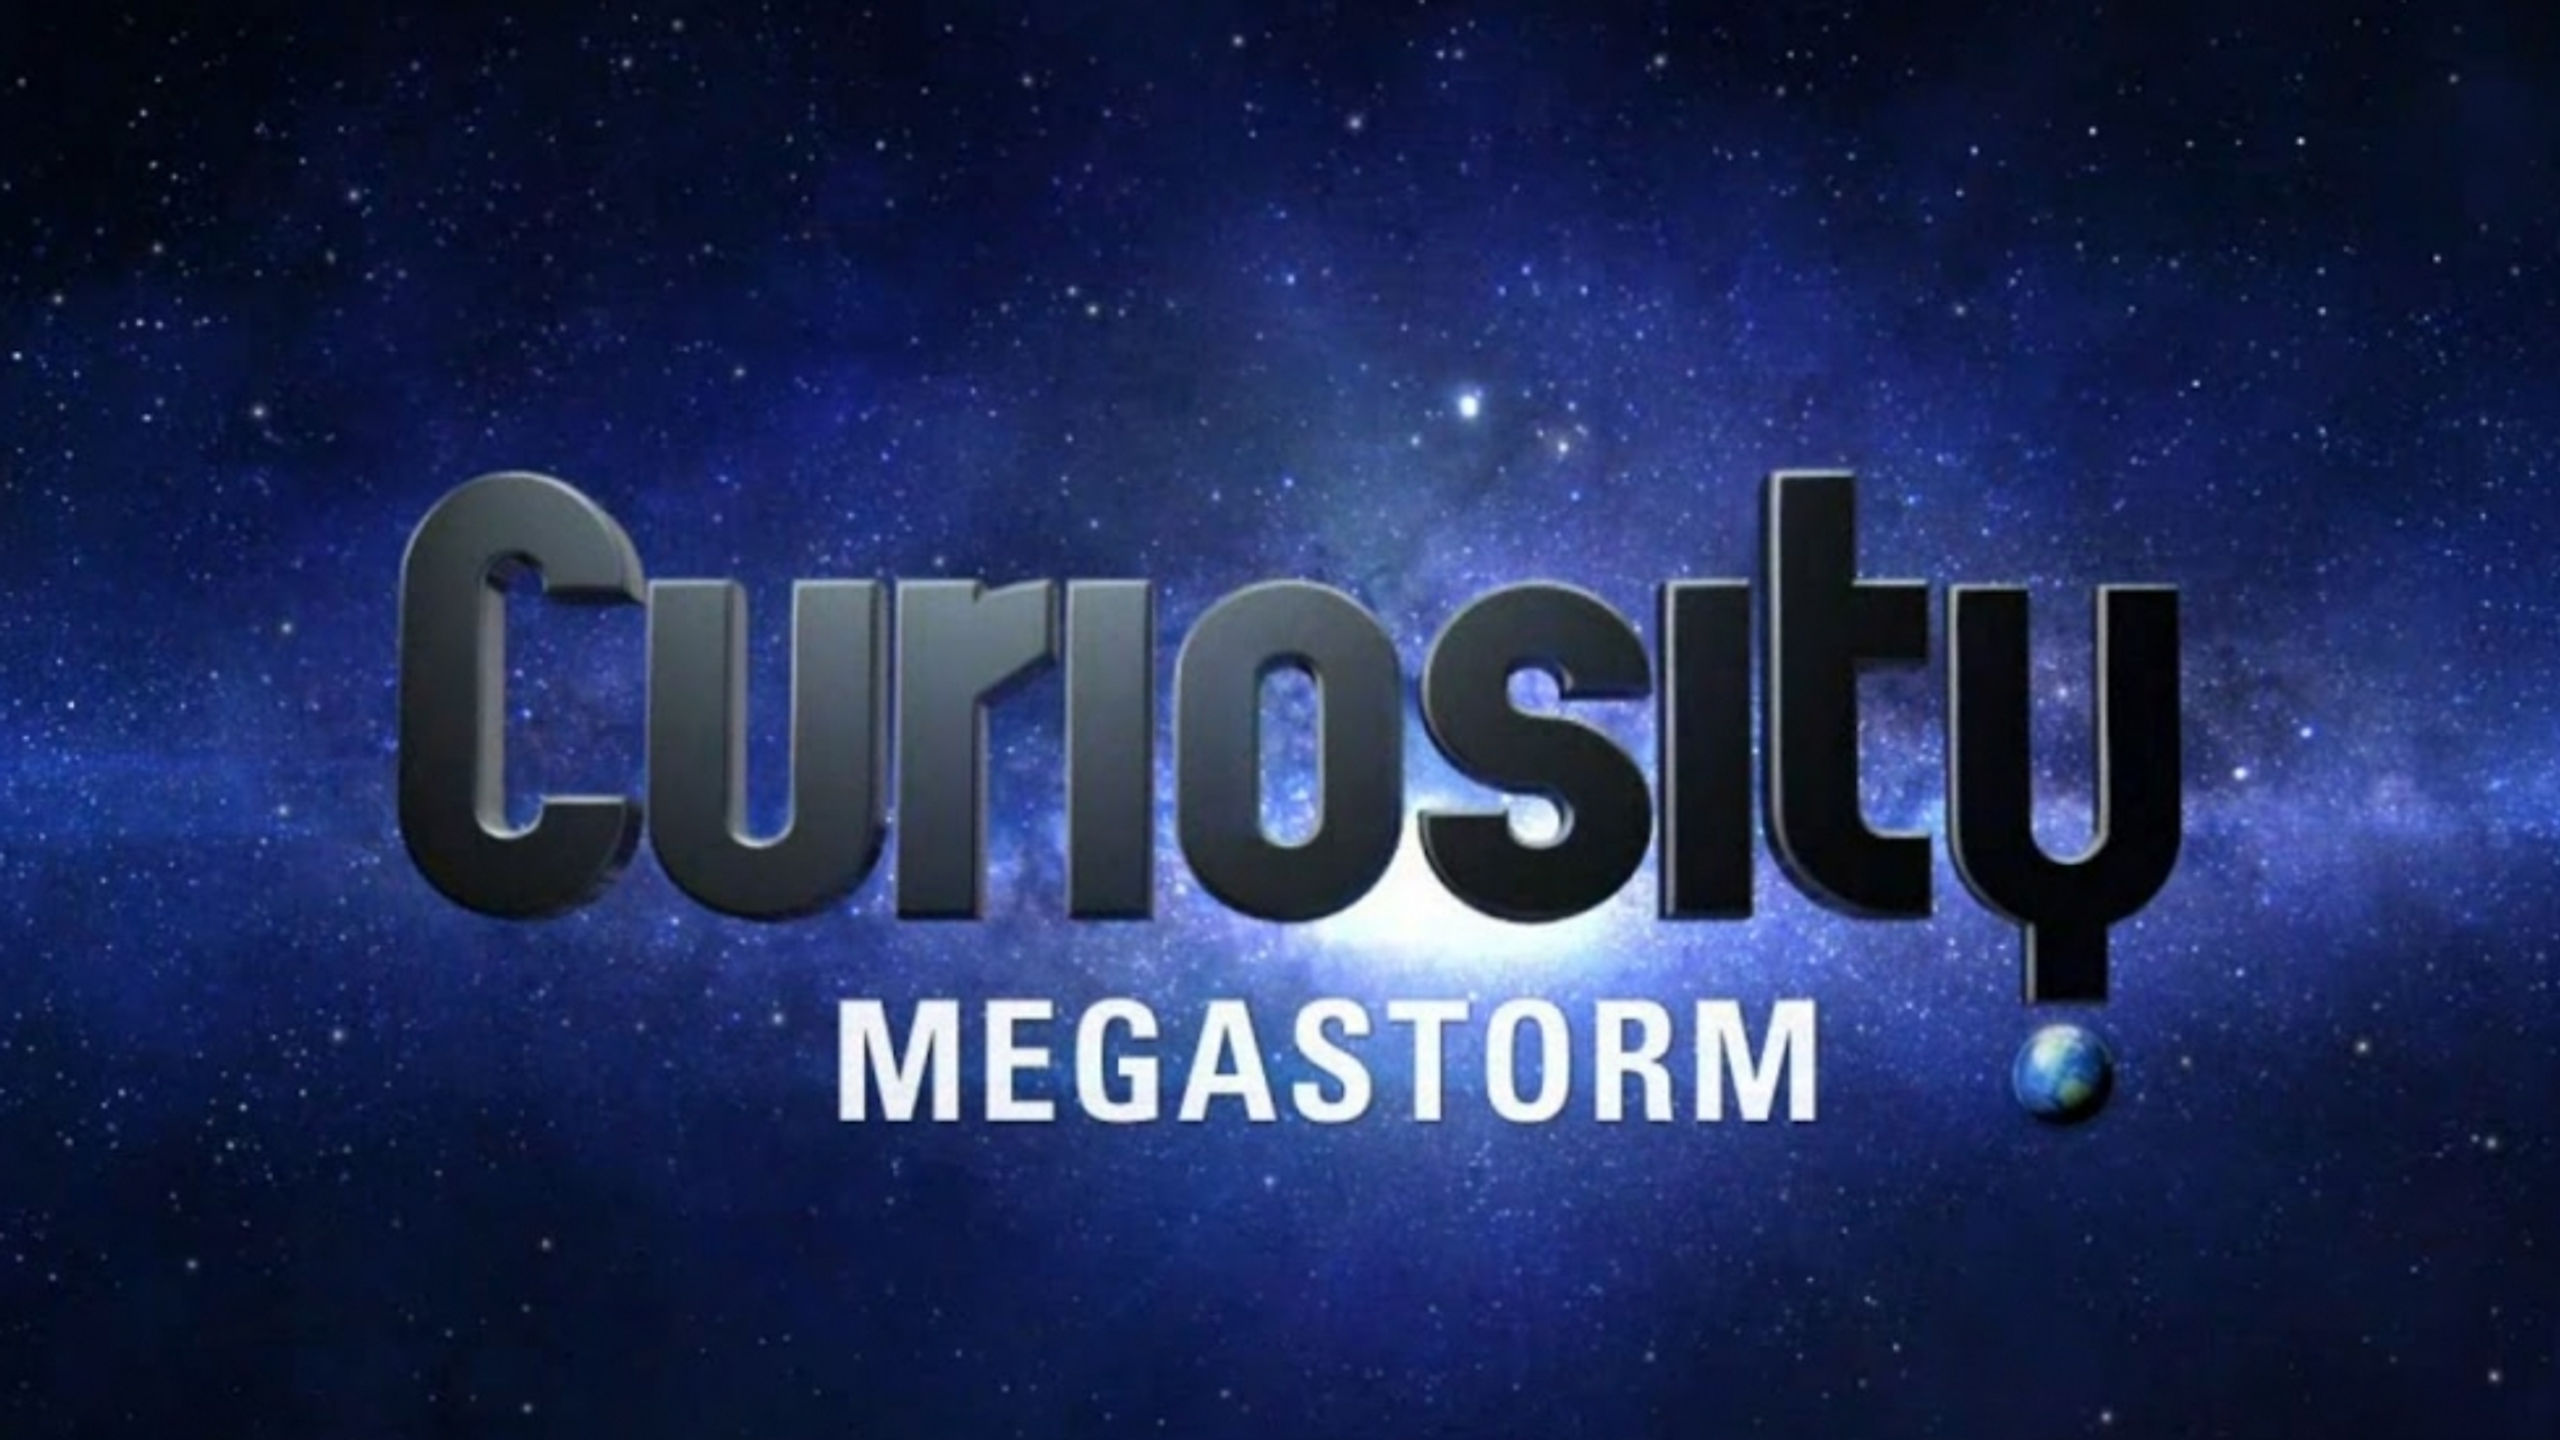 Curiosity: Megastorm - Discovery Channel